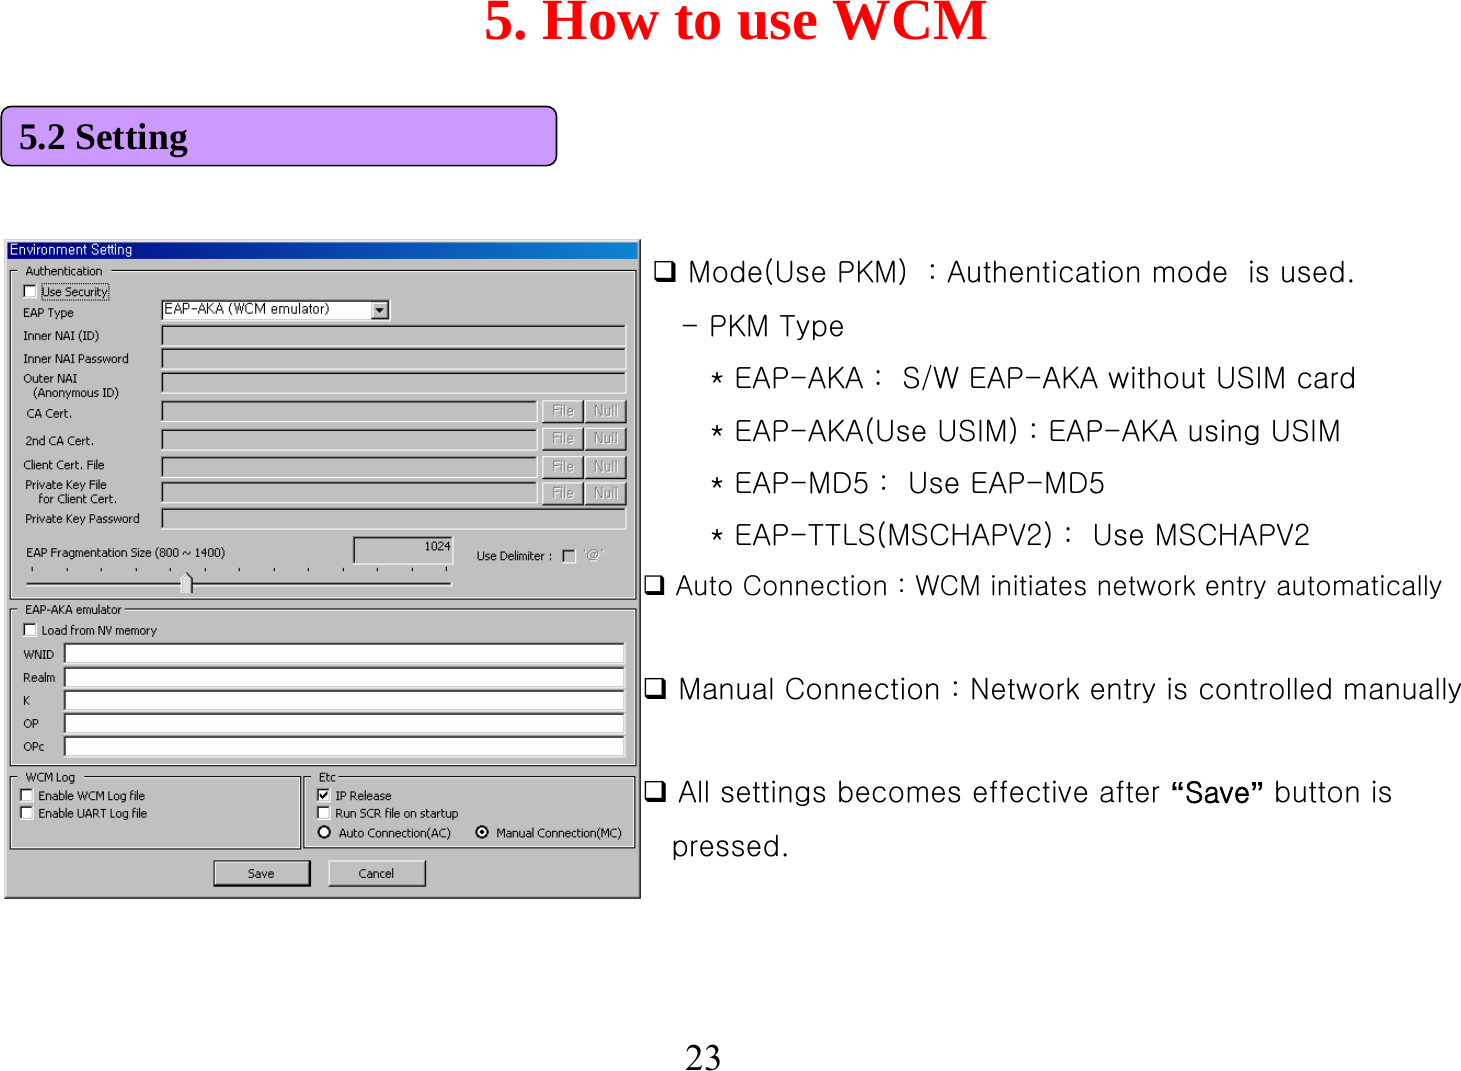 5. How to use WCM23Mode(Use PKM)  : Authentication mode  is used.-PKM Type* EAP-AKA :  S/W EAP-AKA without USIM card* EAP-AKA(Use USIM) : EAP-AKA using USIM* EAP-MD5 :  Use EAP-MD5* EAP-TTLS(MSCHAPV2) :  Use MSCHAPV2Auto Connection : WCM initiates network entry automaticallyManual Connection : Network entry is controlled manuallyAll settings becomes effective after “Save”button is  pressed.5.2 Setting